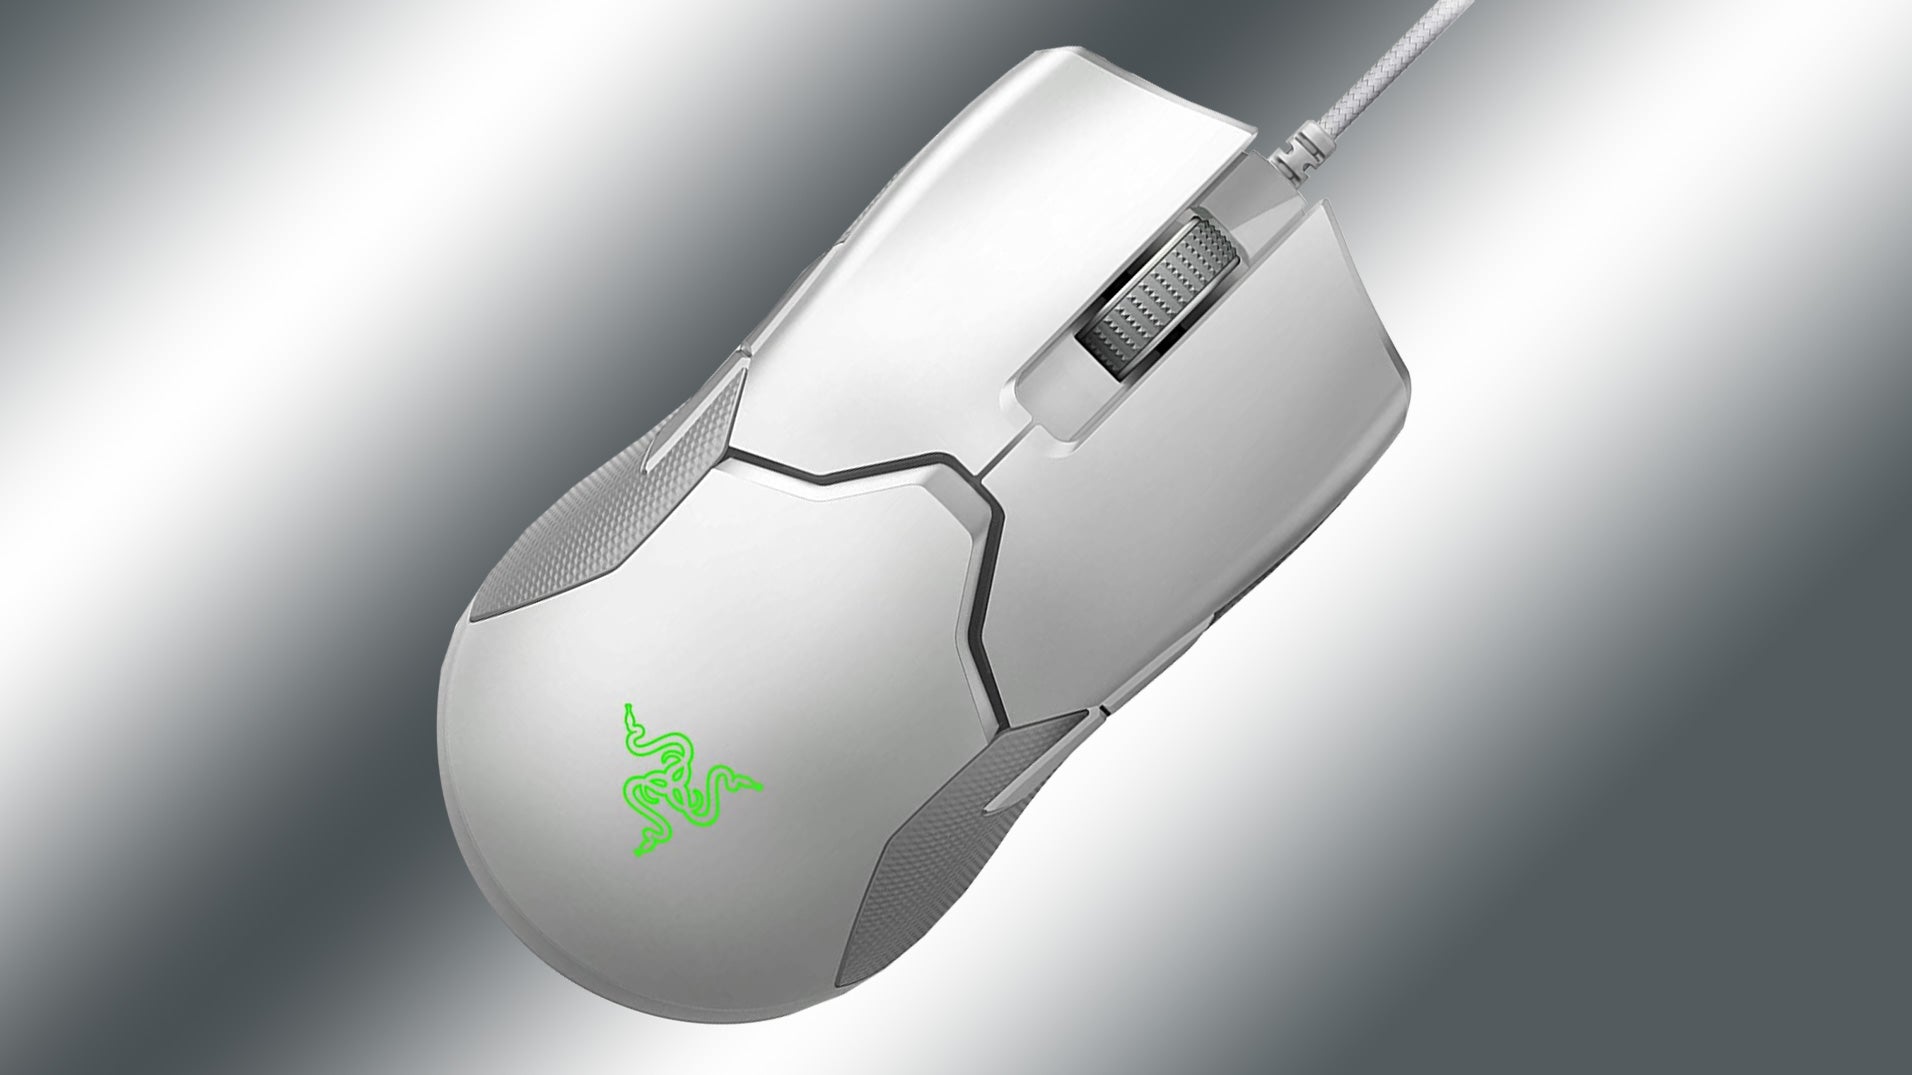 a photo of a razer viper in mercury white, showing the ambidextrous design, side grips and glowing green logo